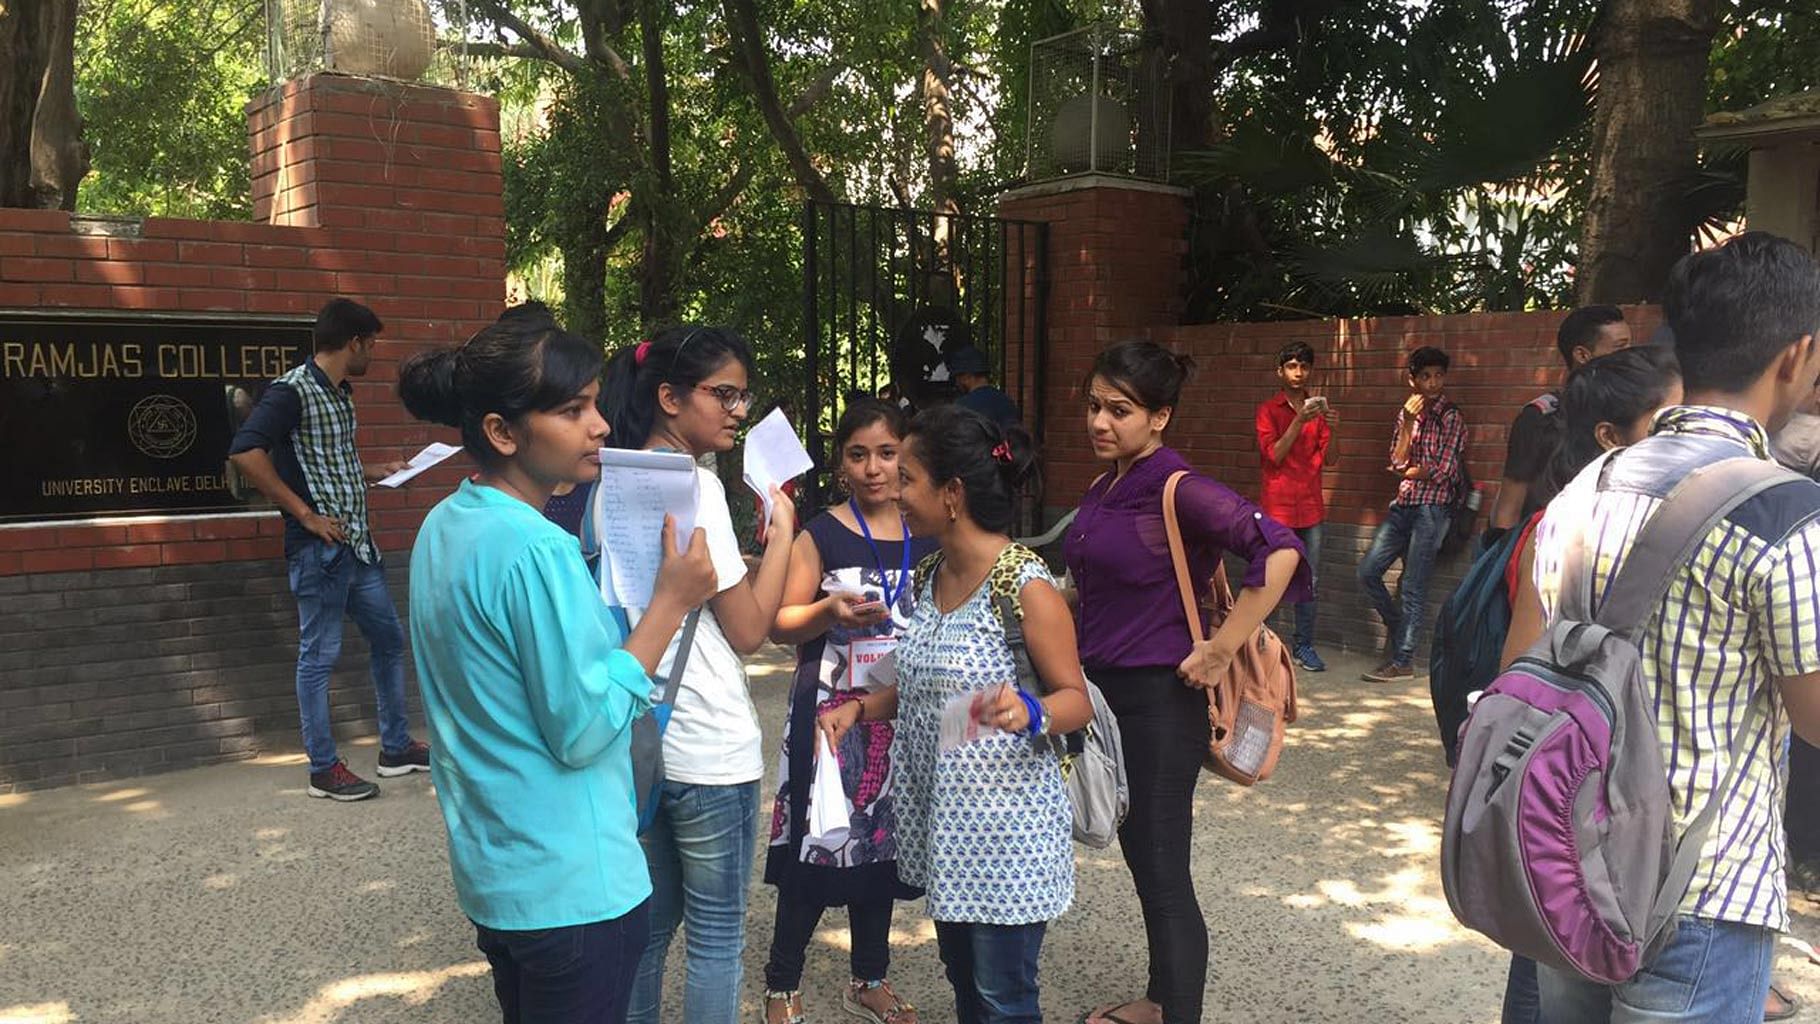 Students standing outside Ramjas College for admissions in Delhi on Thursday, 30 June 2016. (Photo: <b>The Quint</b>)